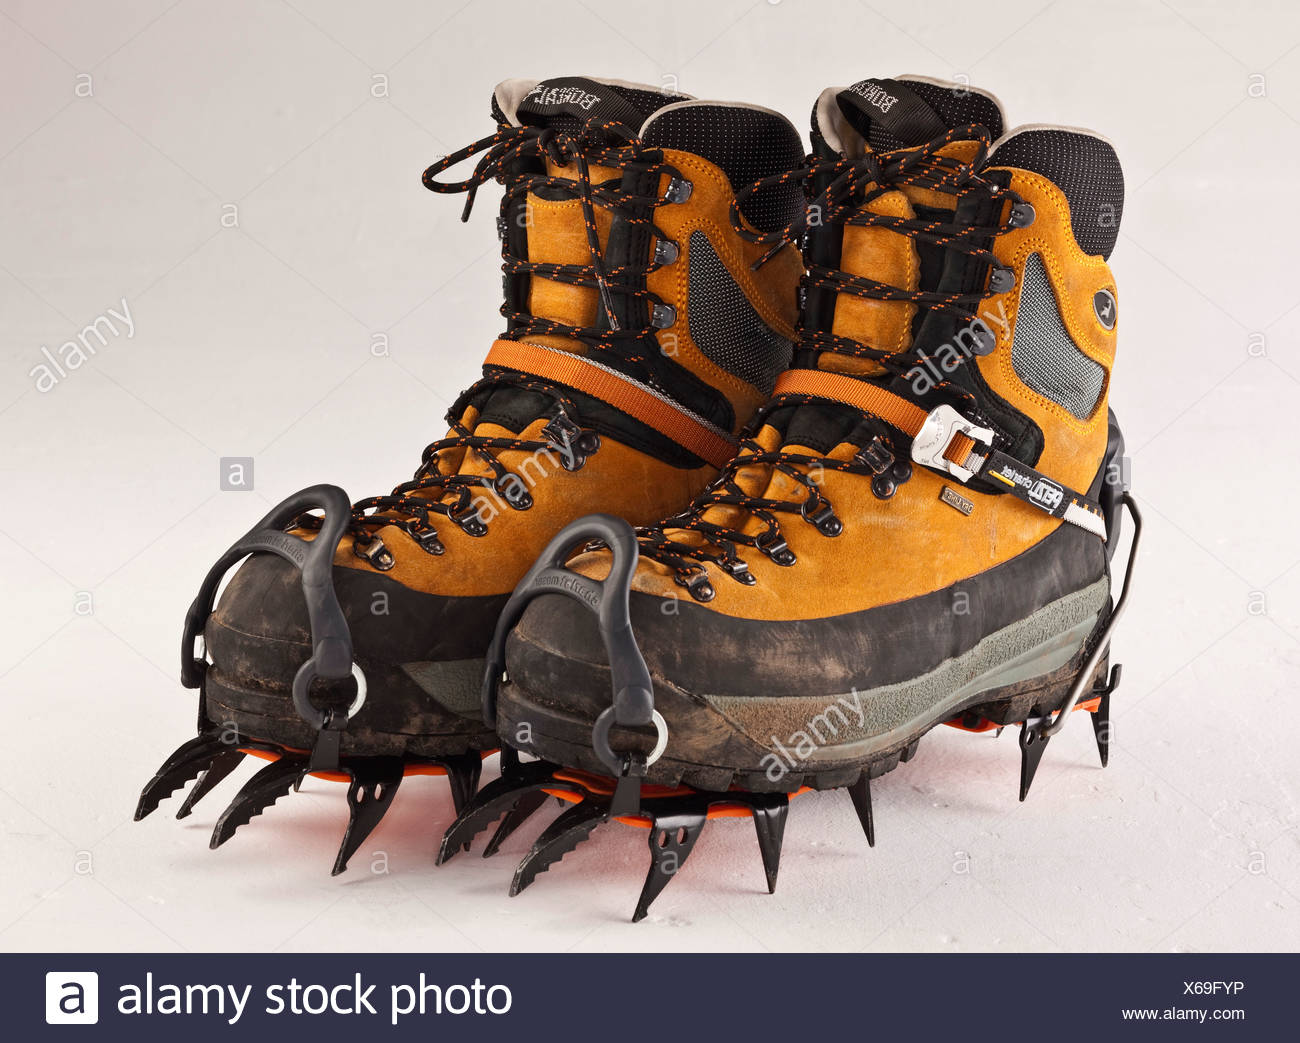 Climbing boots with spikes for traction 